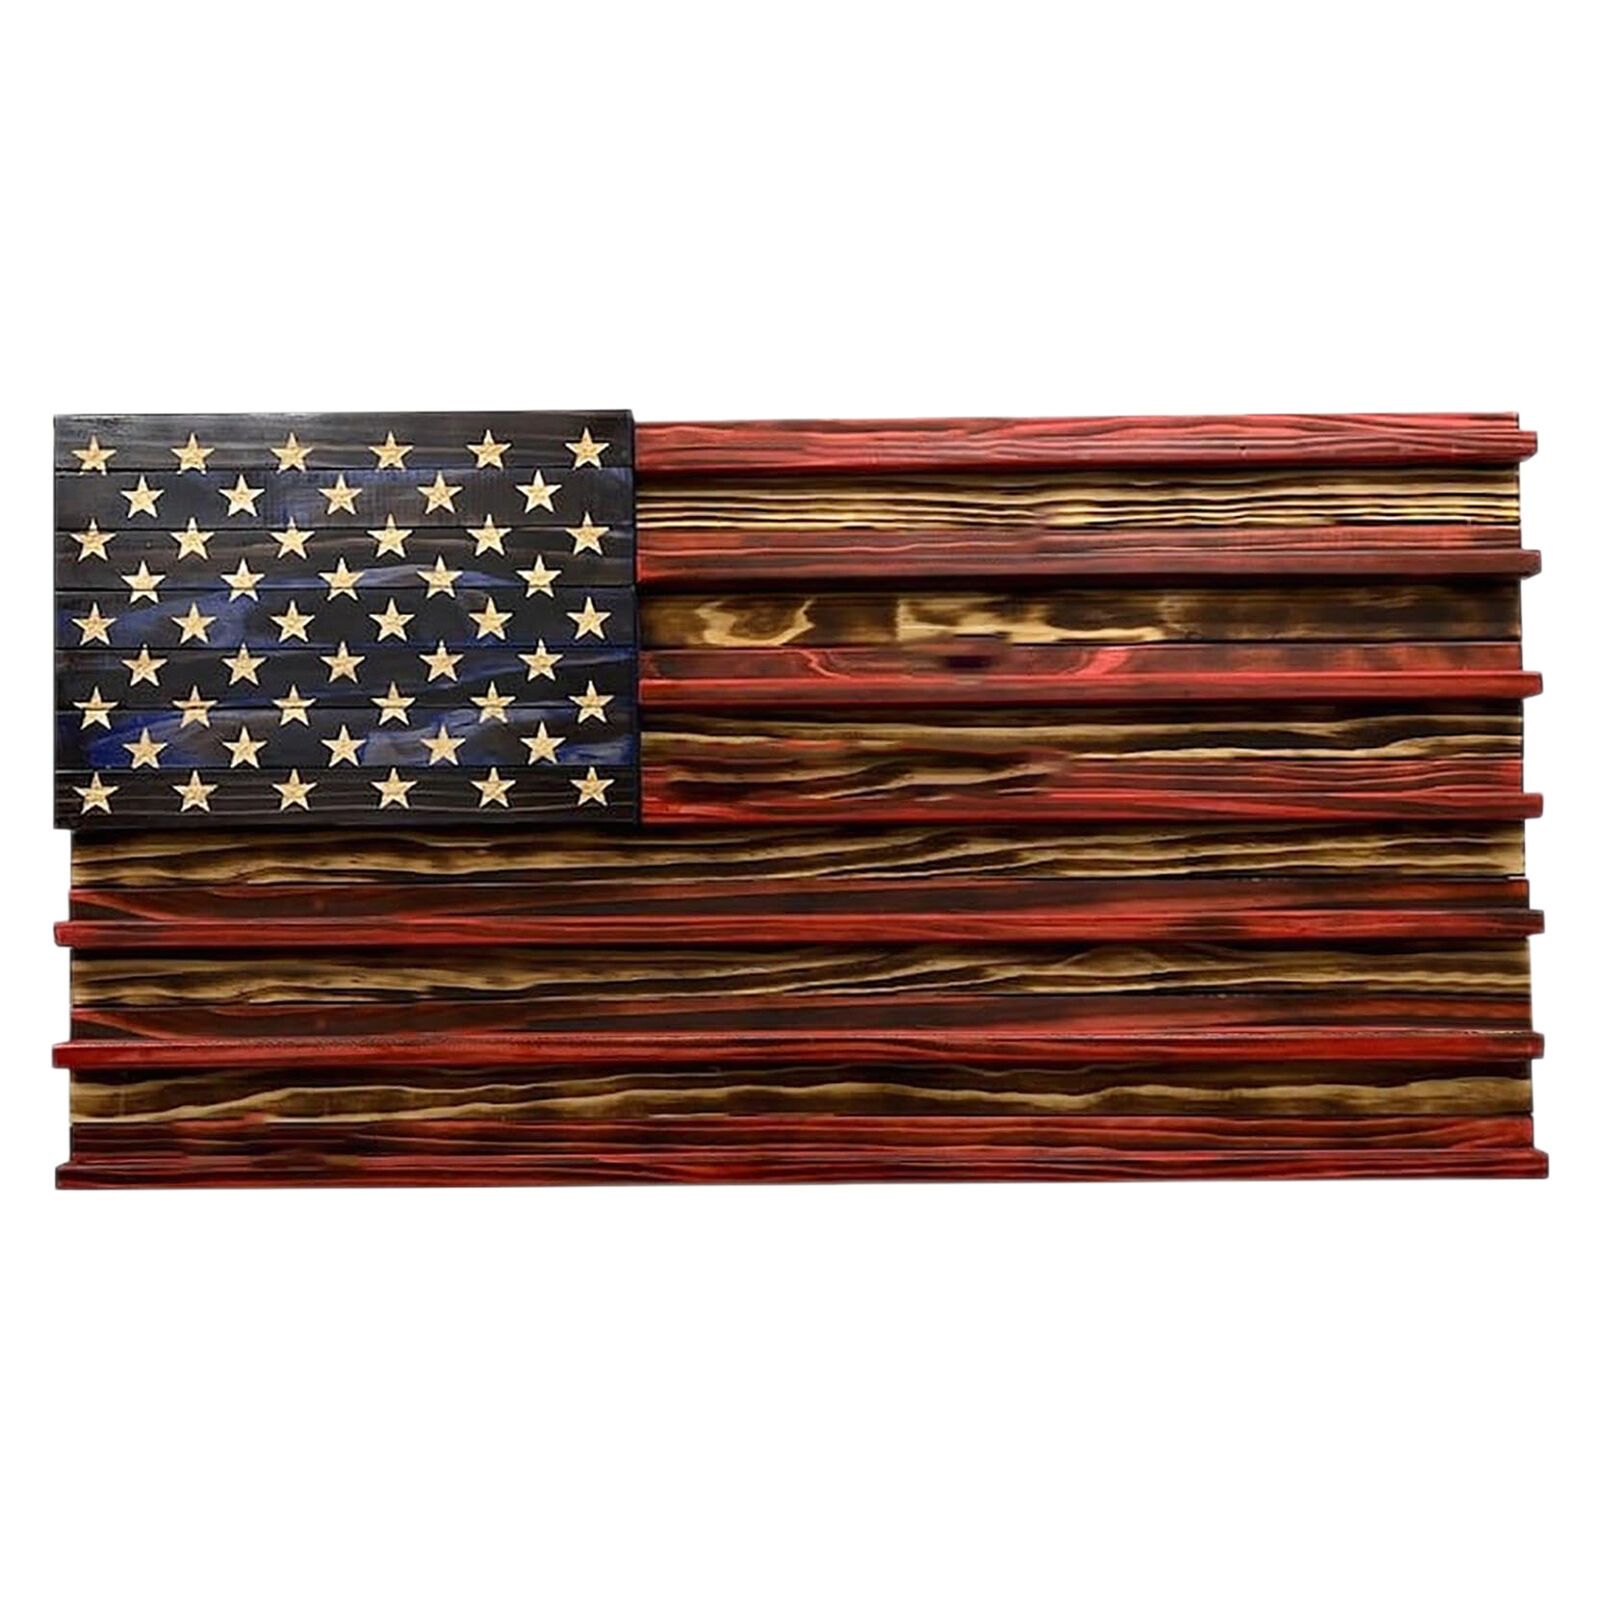 Vintage American Flag Solid Wood Wall Mounted Challenge Coin Display Holder Rack